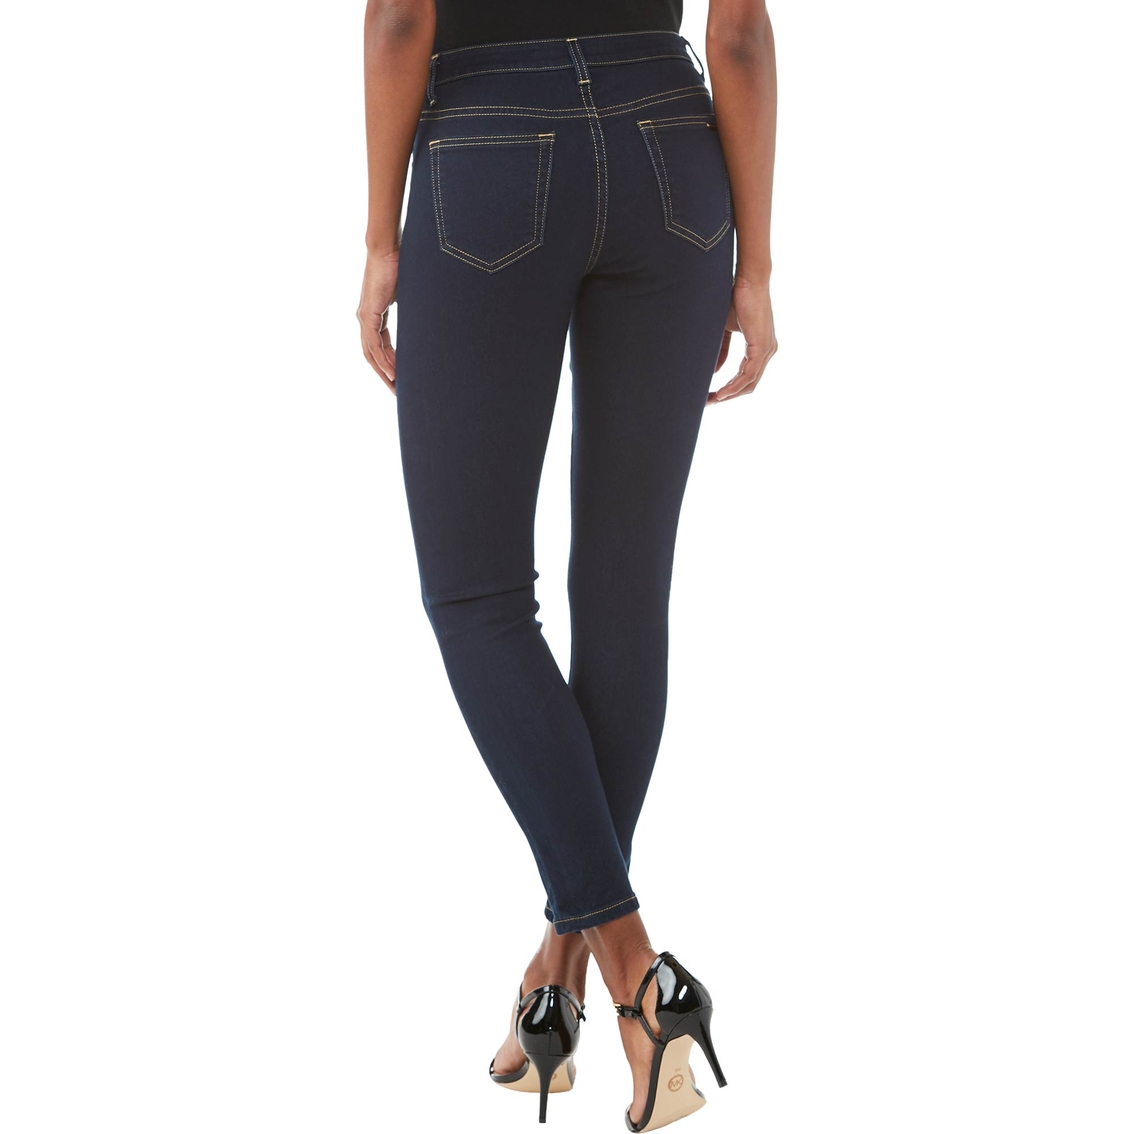 Michael Kors Stretch High Rise Skinny Jean - Image 2 of 3